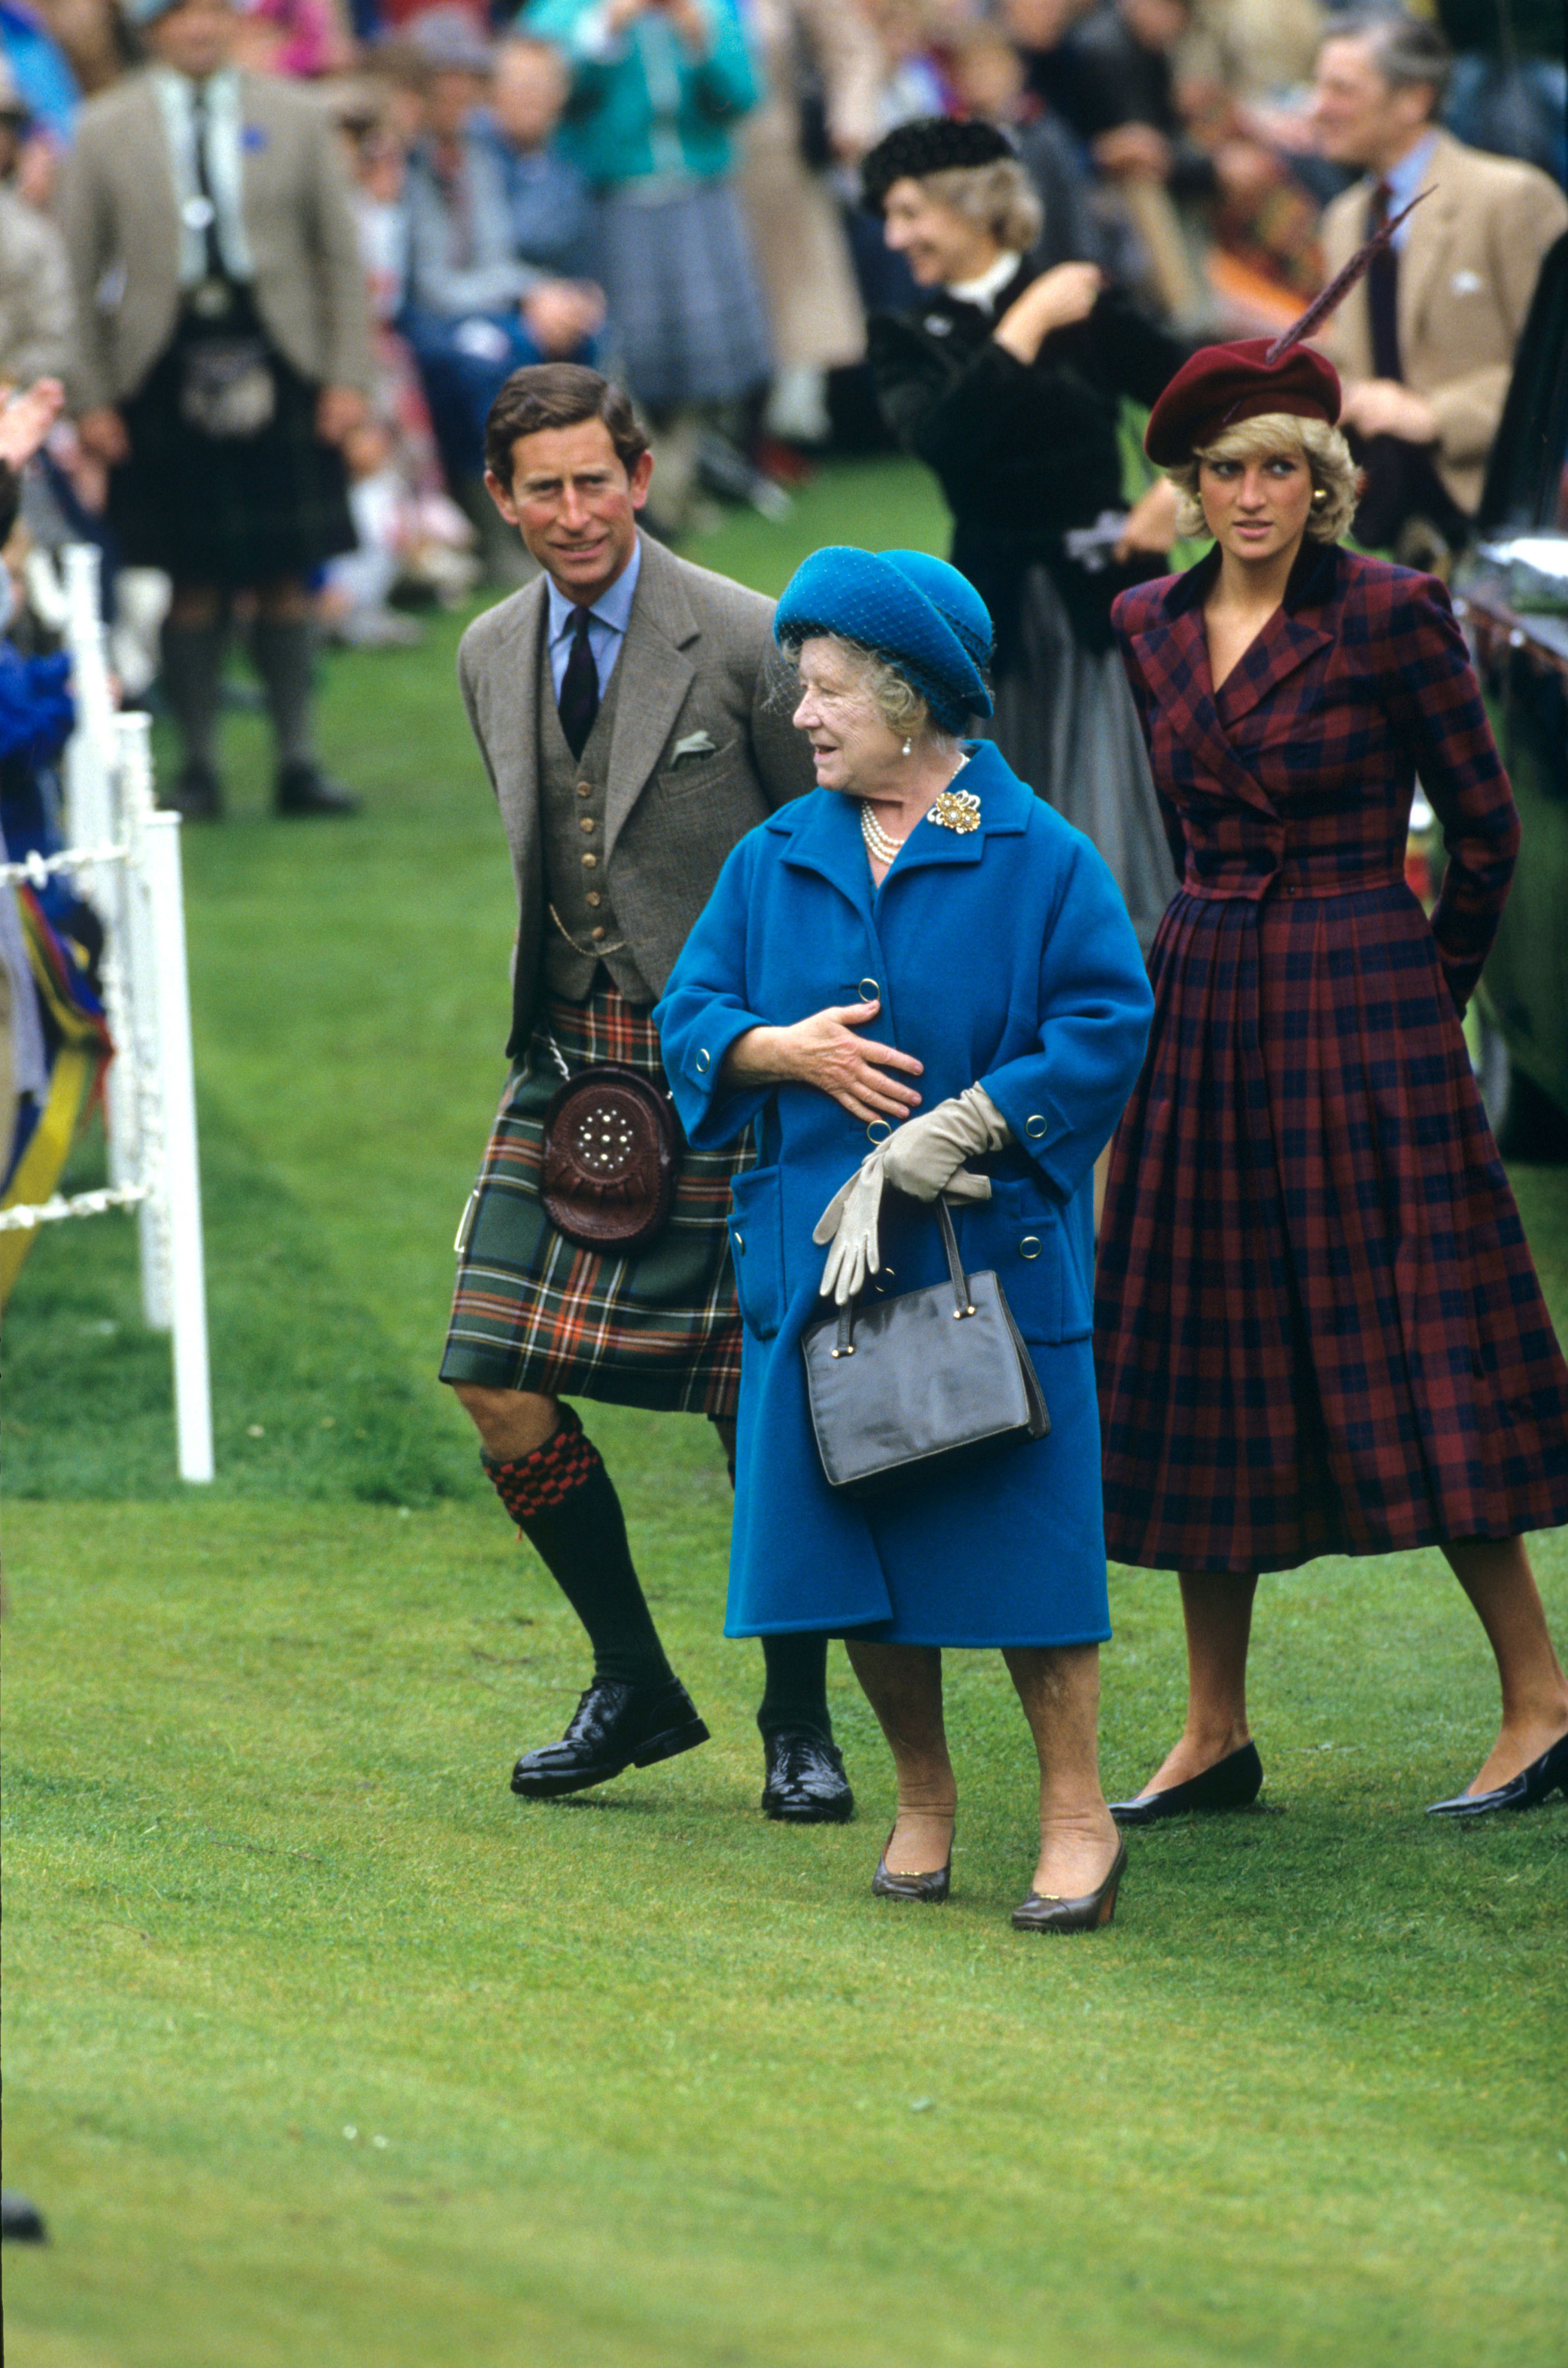 <p>A kilted Prince Charles accompanied his grandmother, Queen Elizabeth the Queen Mother, and plaid-clad wife Princess Diana to watch the Braemar Highland Games in Scotland in September 1987.</p>